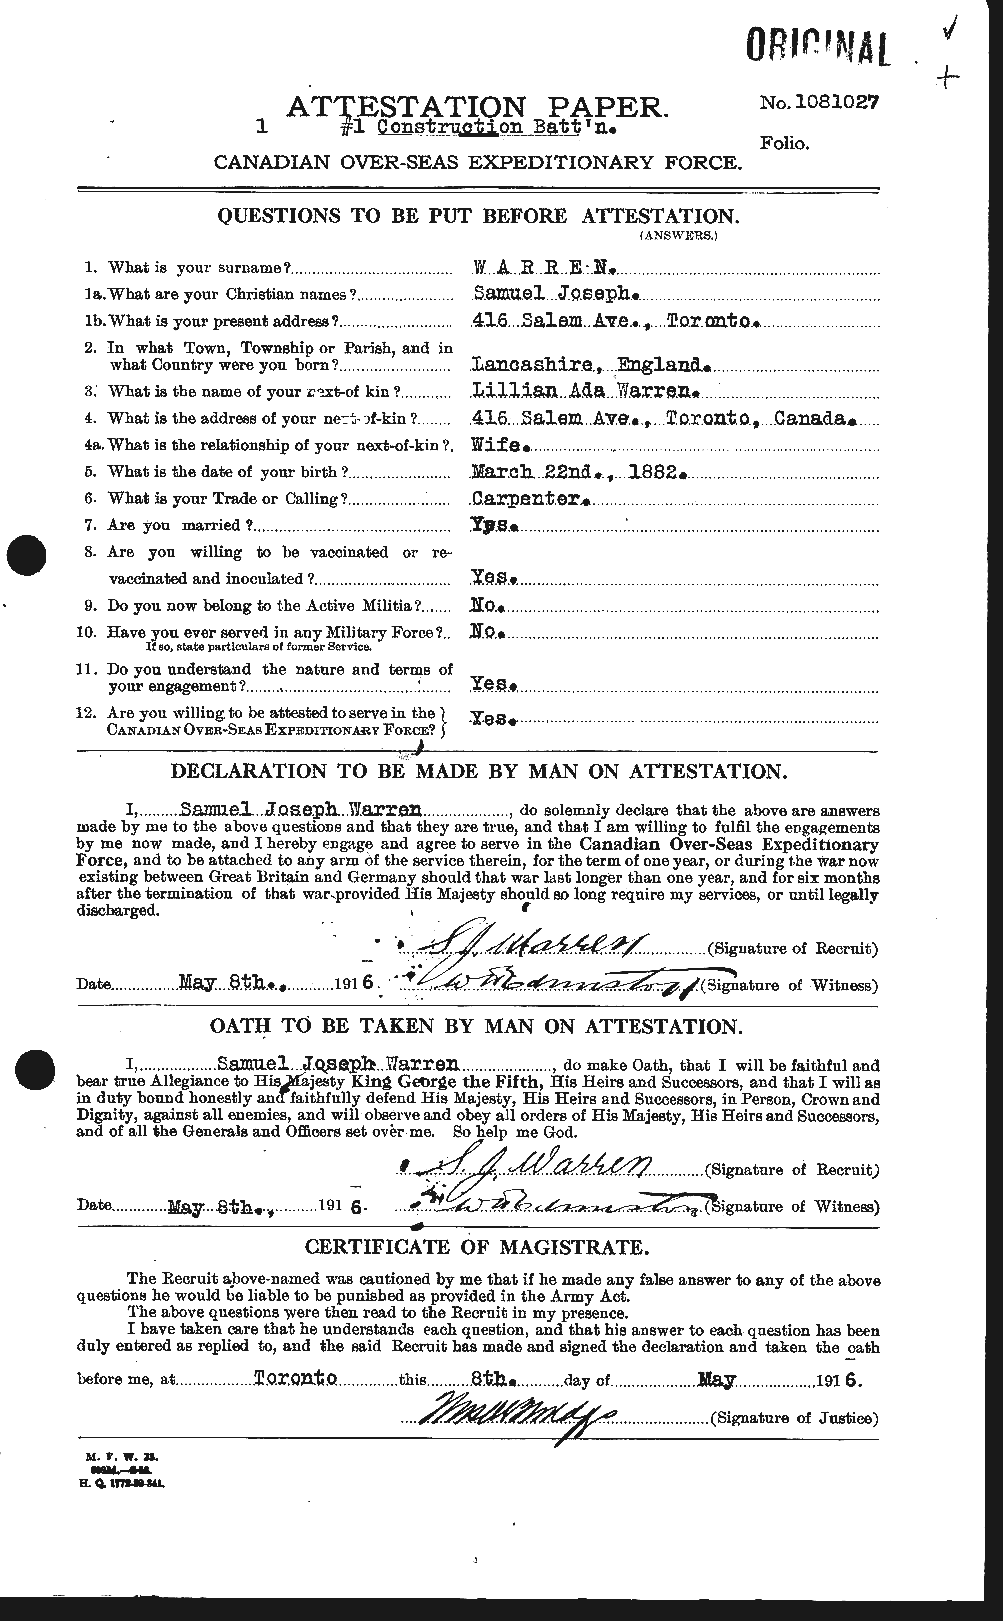 Personnel Records of the First World War - CEF 658634a